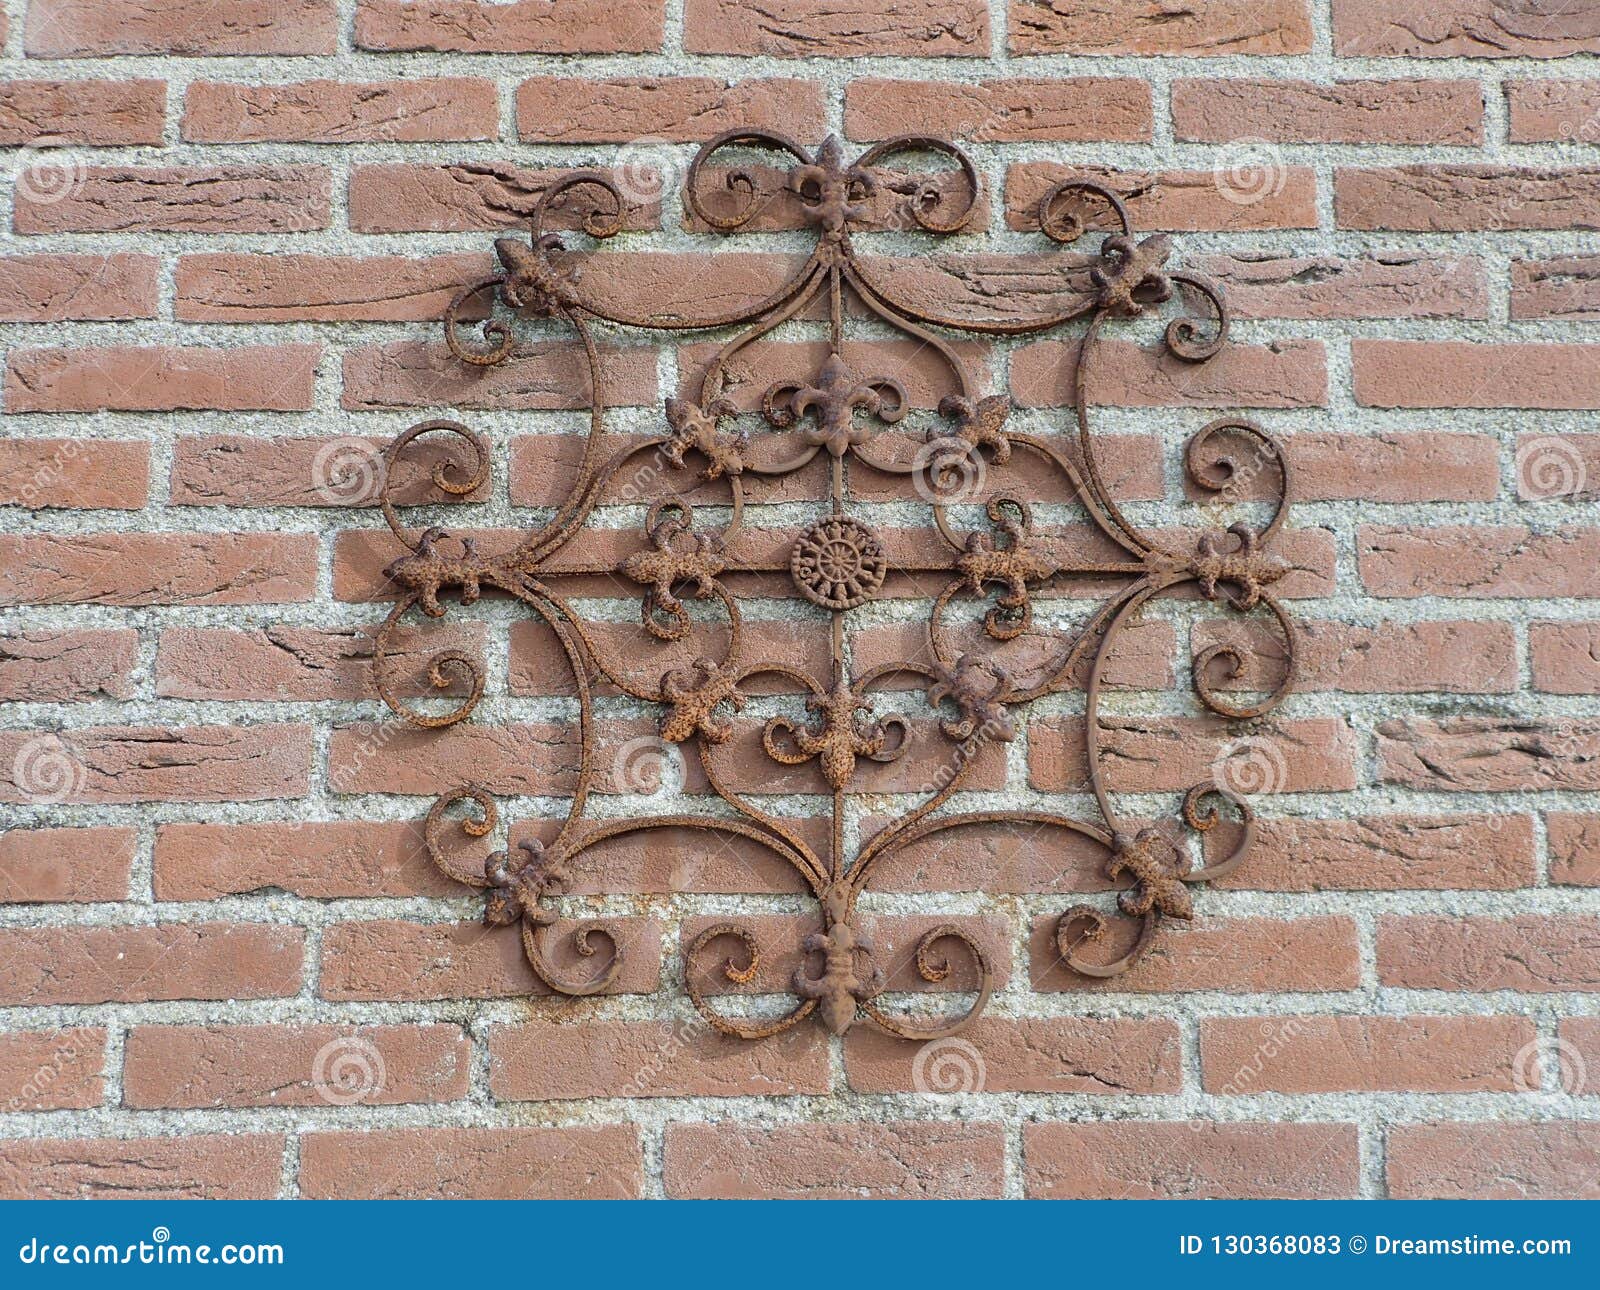 Round Metal Ornament on a Brick Wall Stock Image - Image of point ...